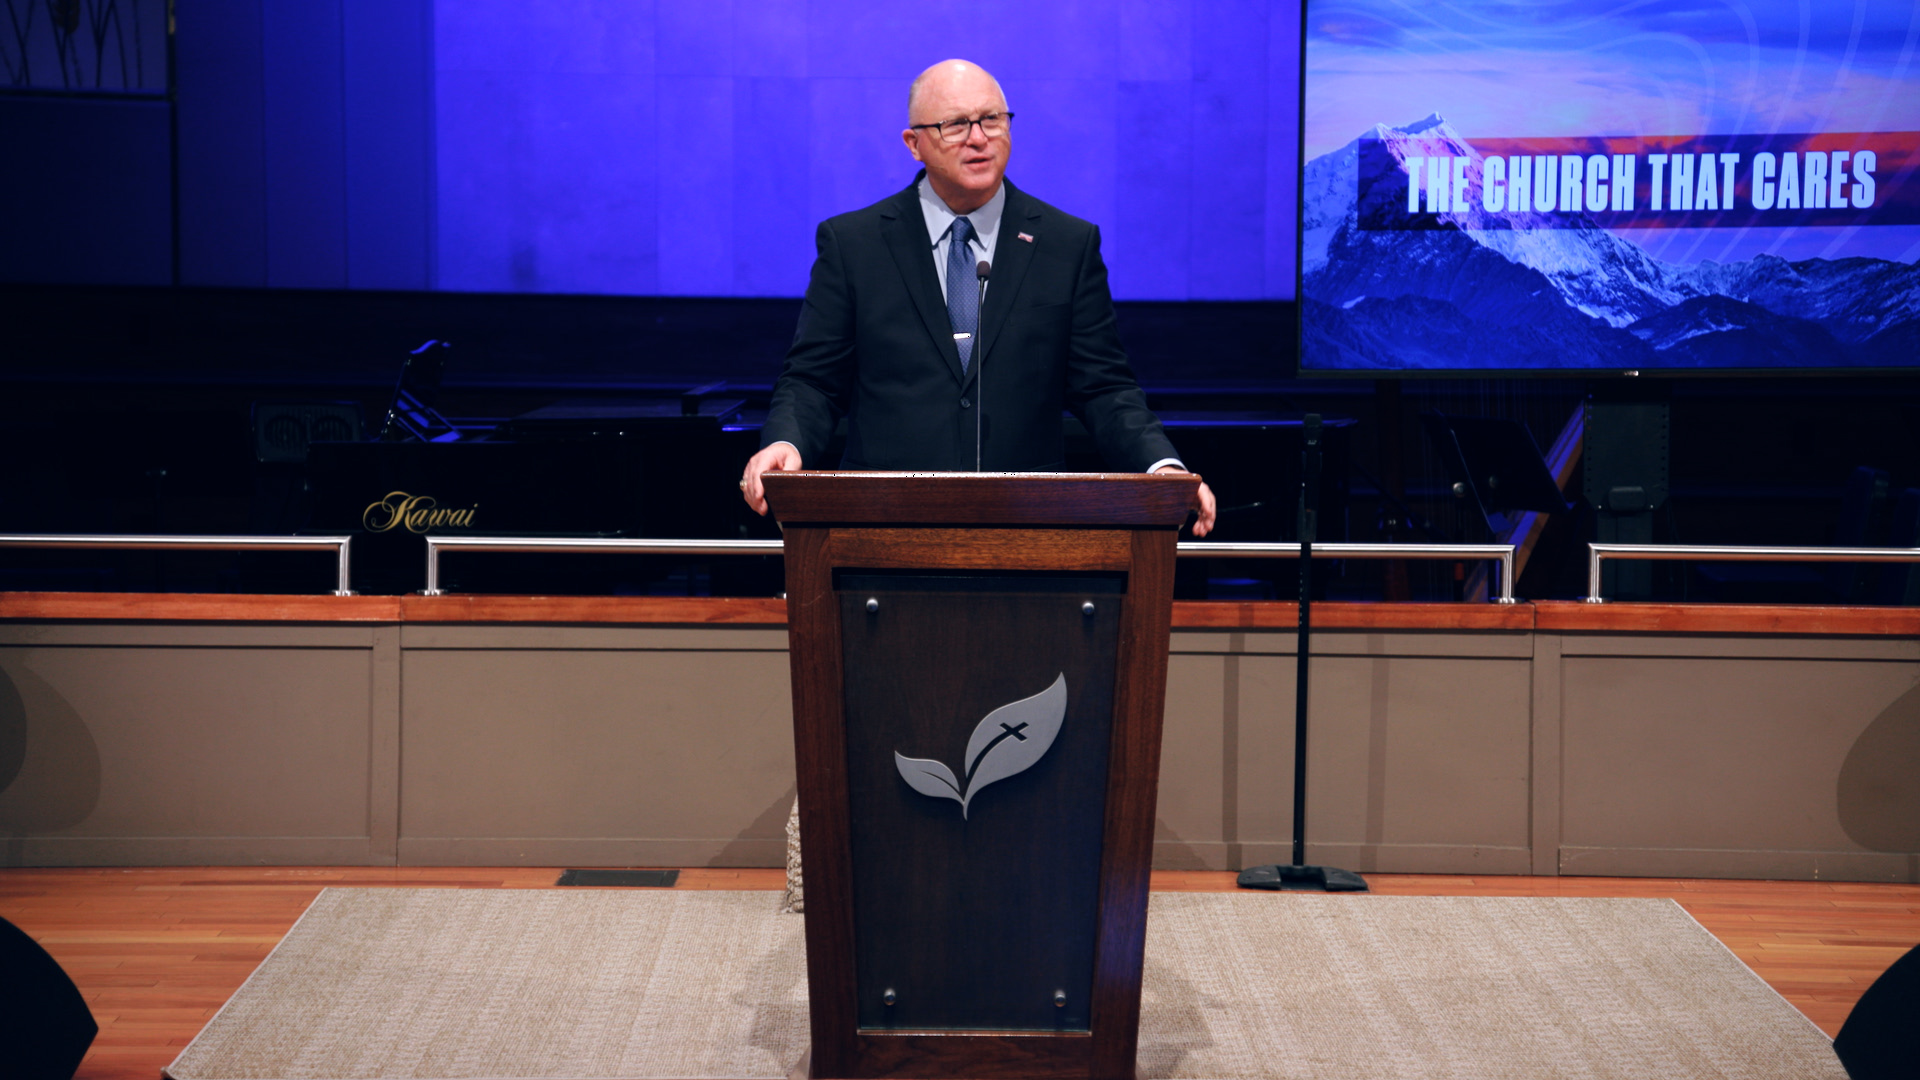 Pastor Paul Chappell: The Church That Cares